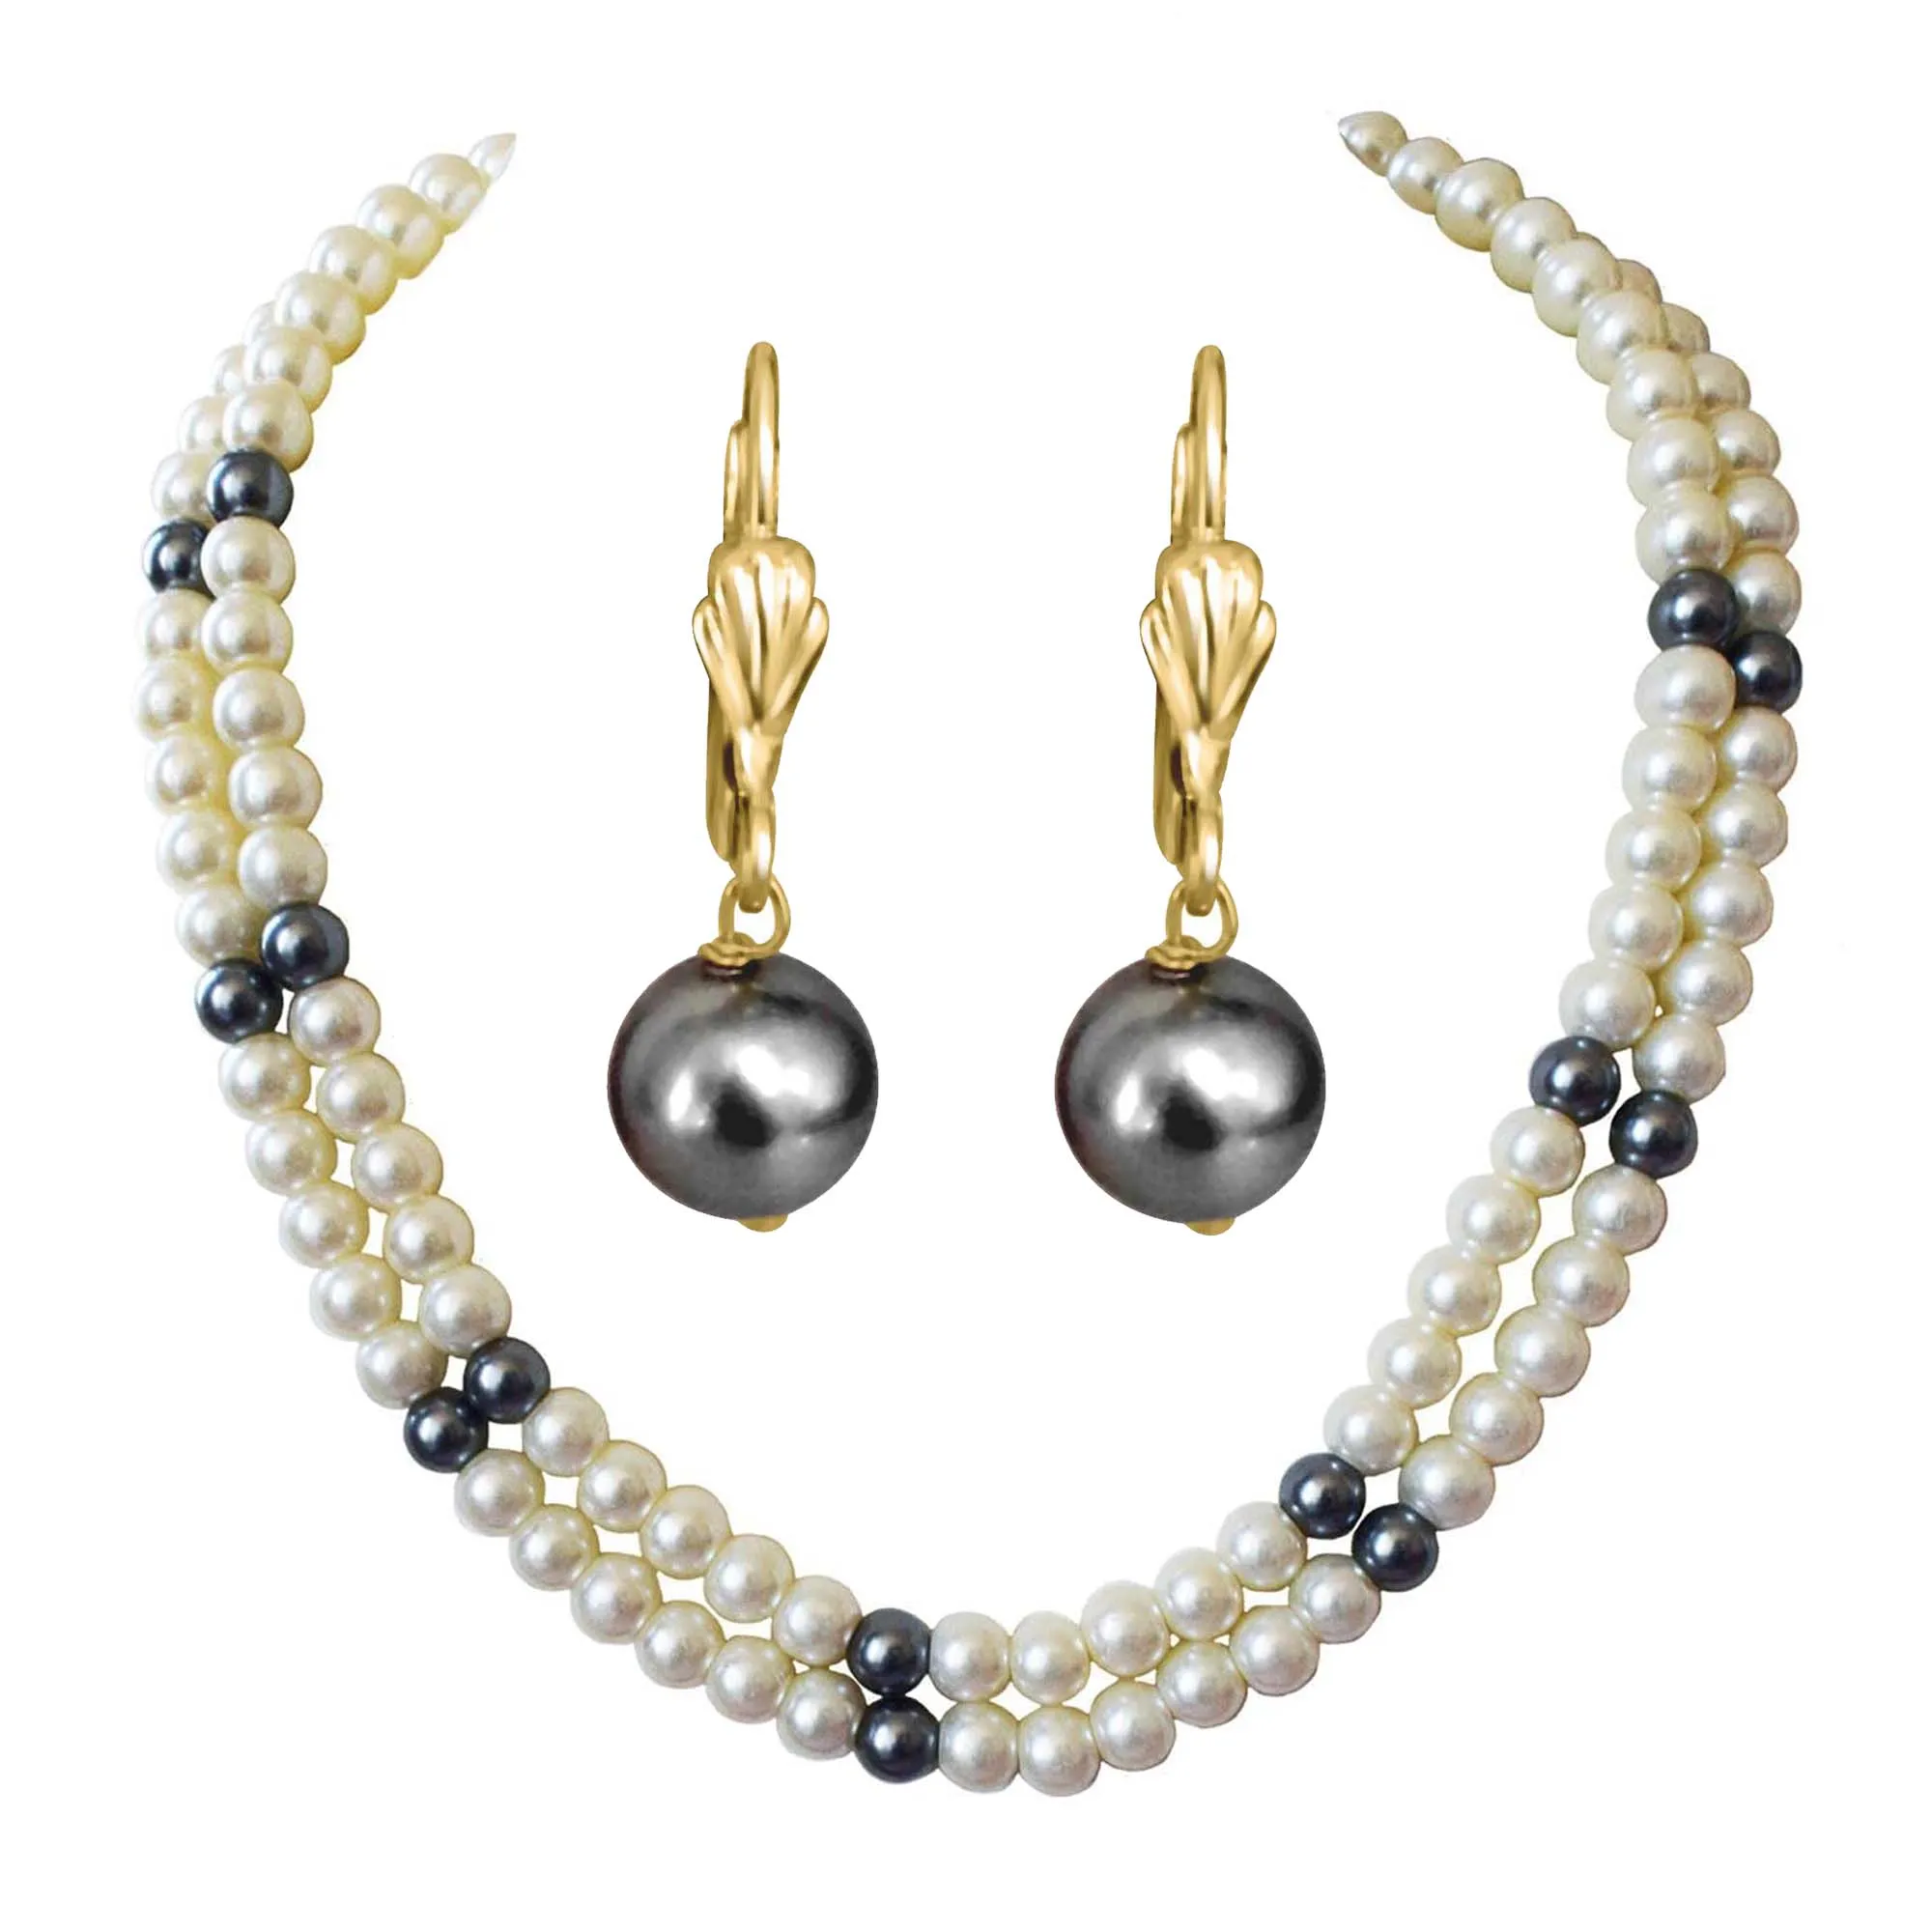 2 Line Heavy Looking White, Grey Shell Pearl Necklace & Earrings (PS578+SE256)